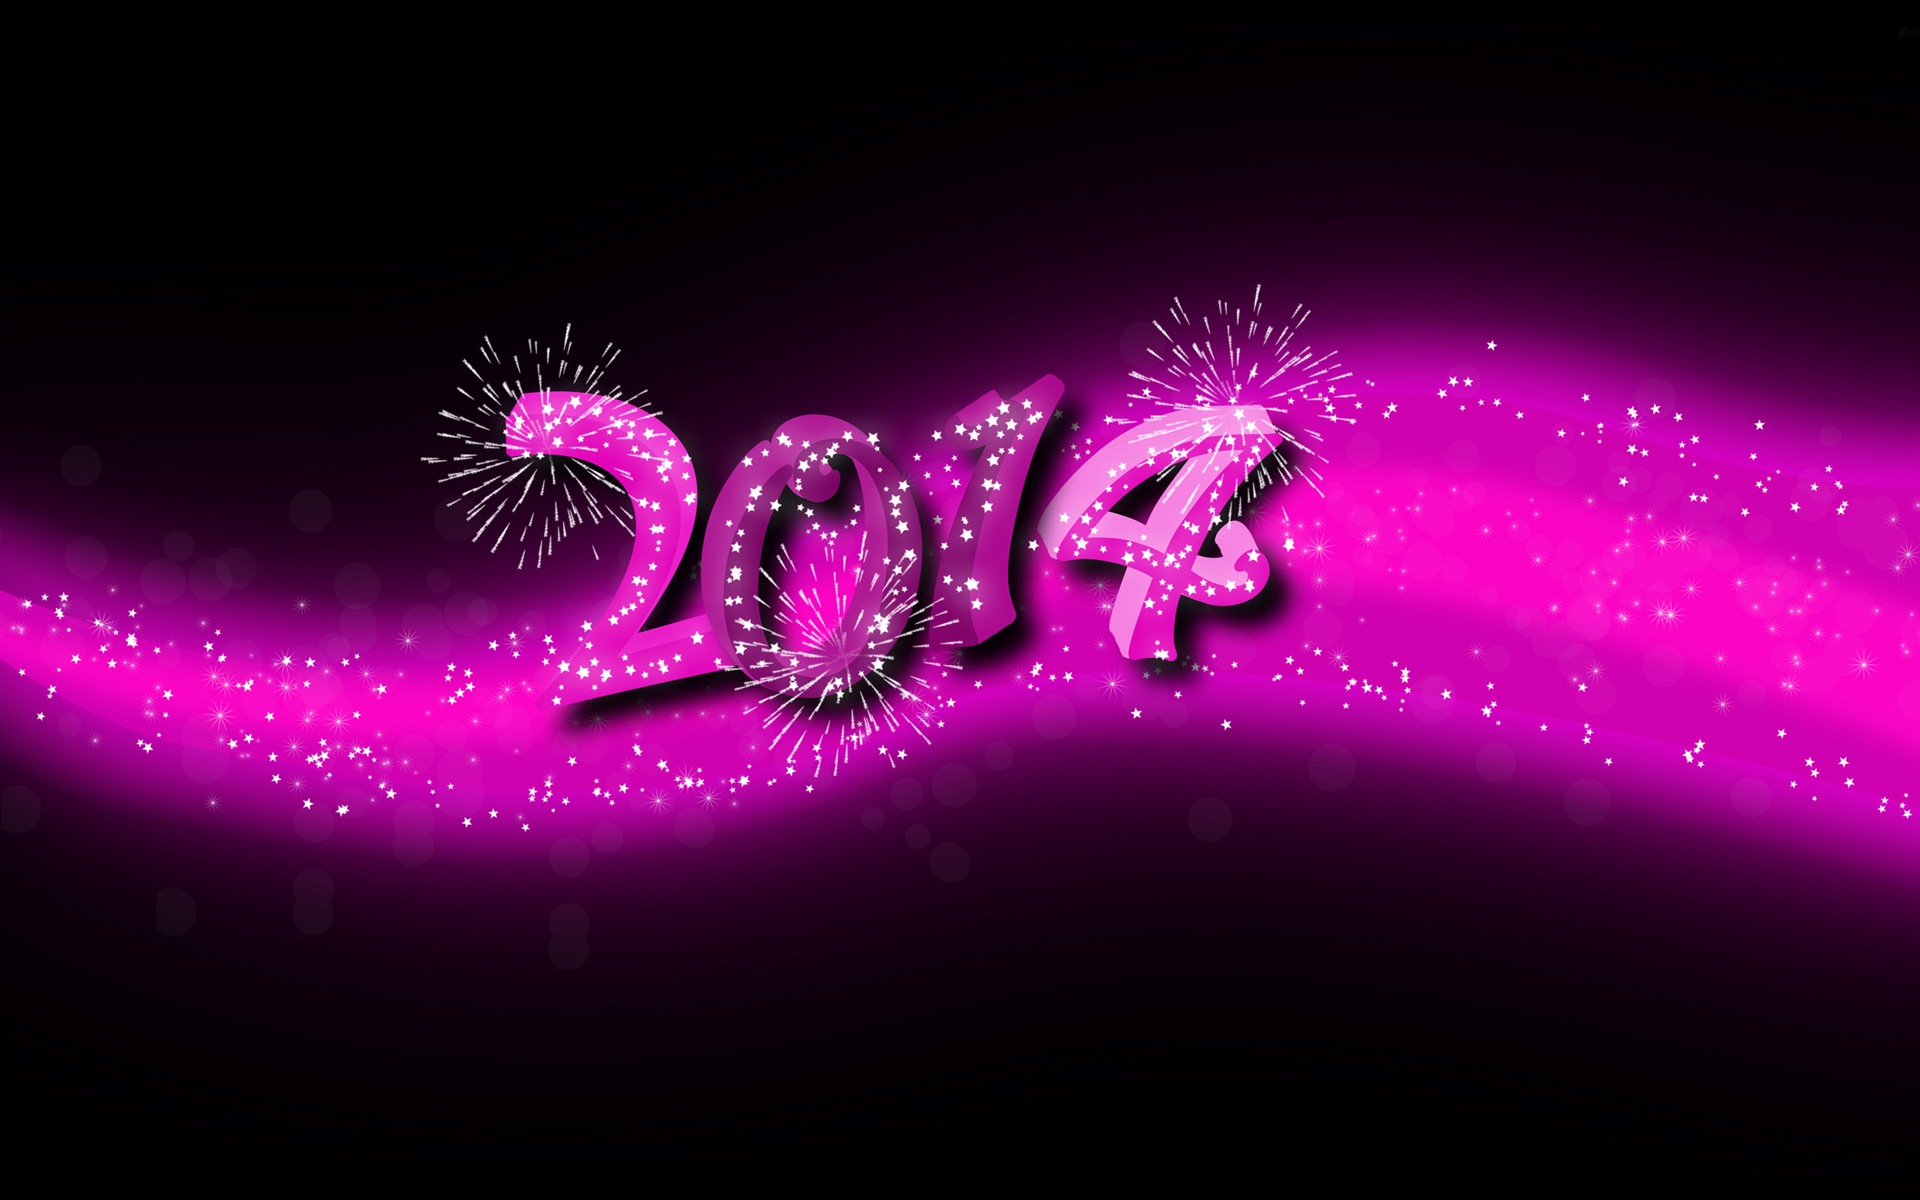 2014 New Year Theme HD Wallpapers (2) #4 - 1920x1200